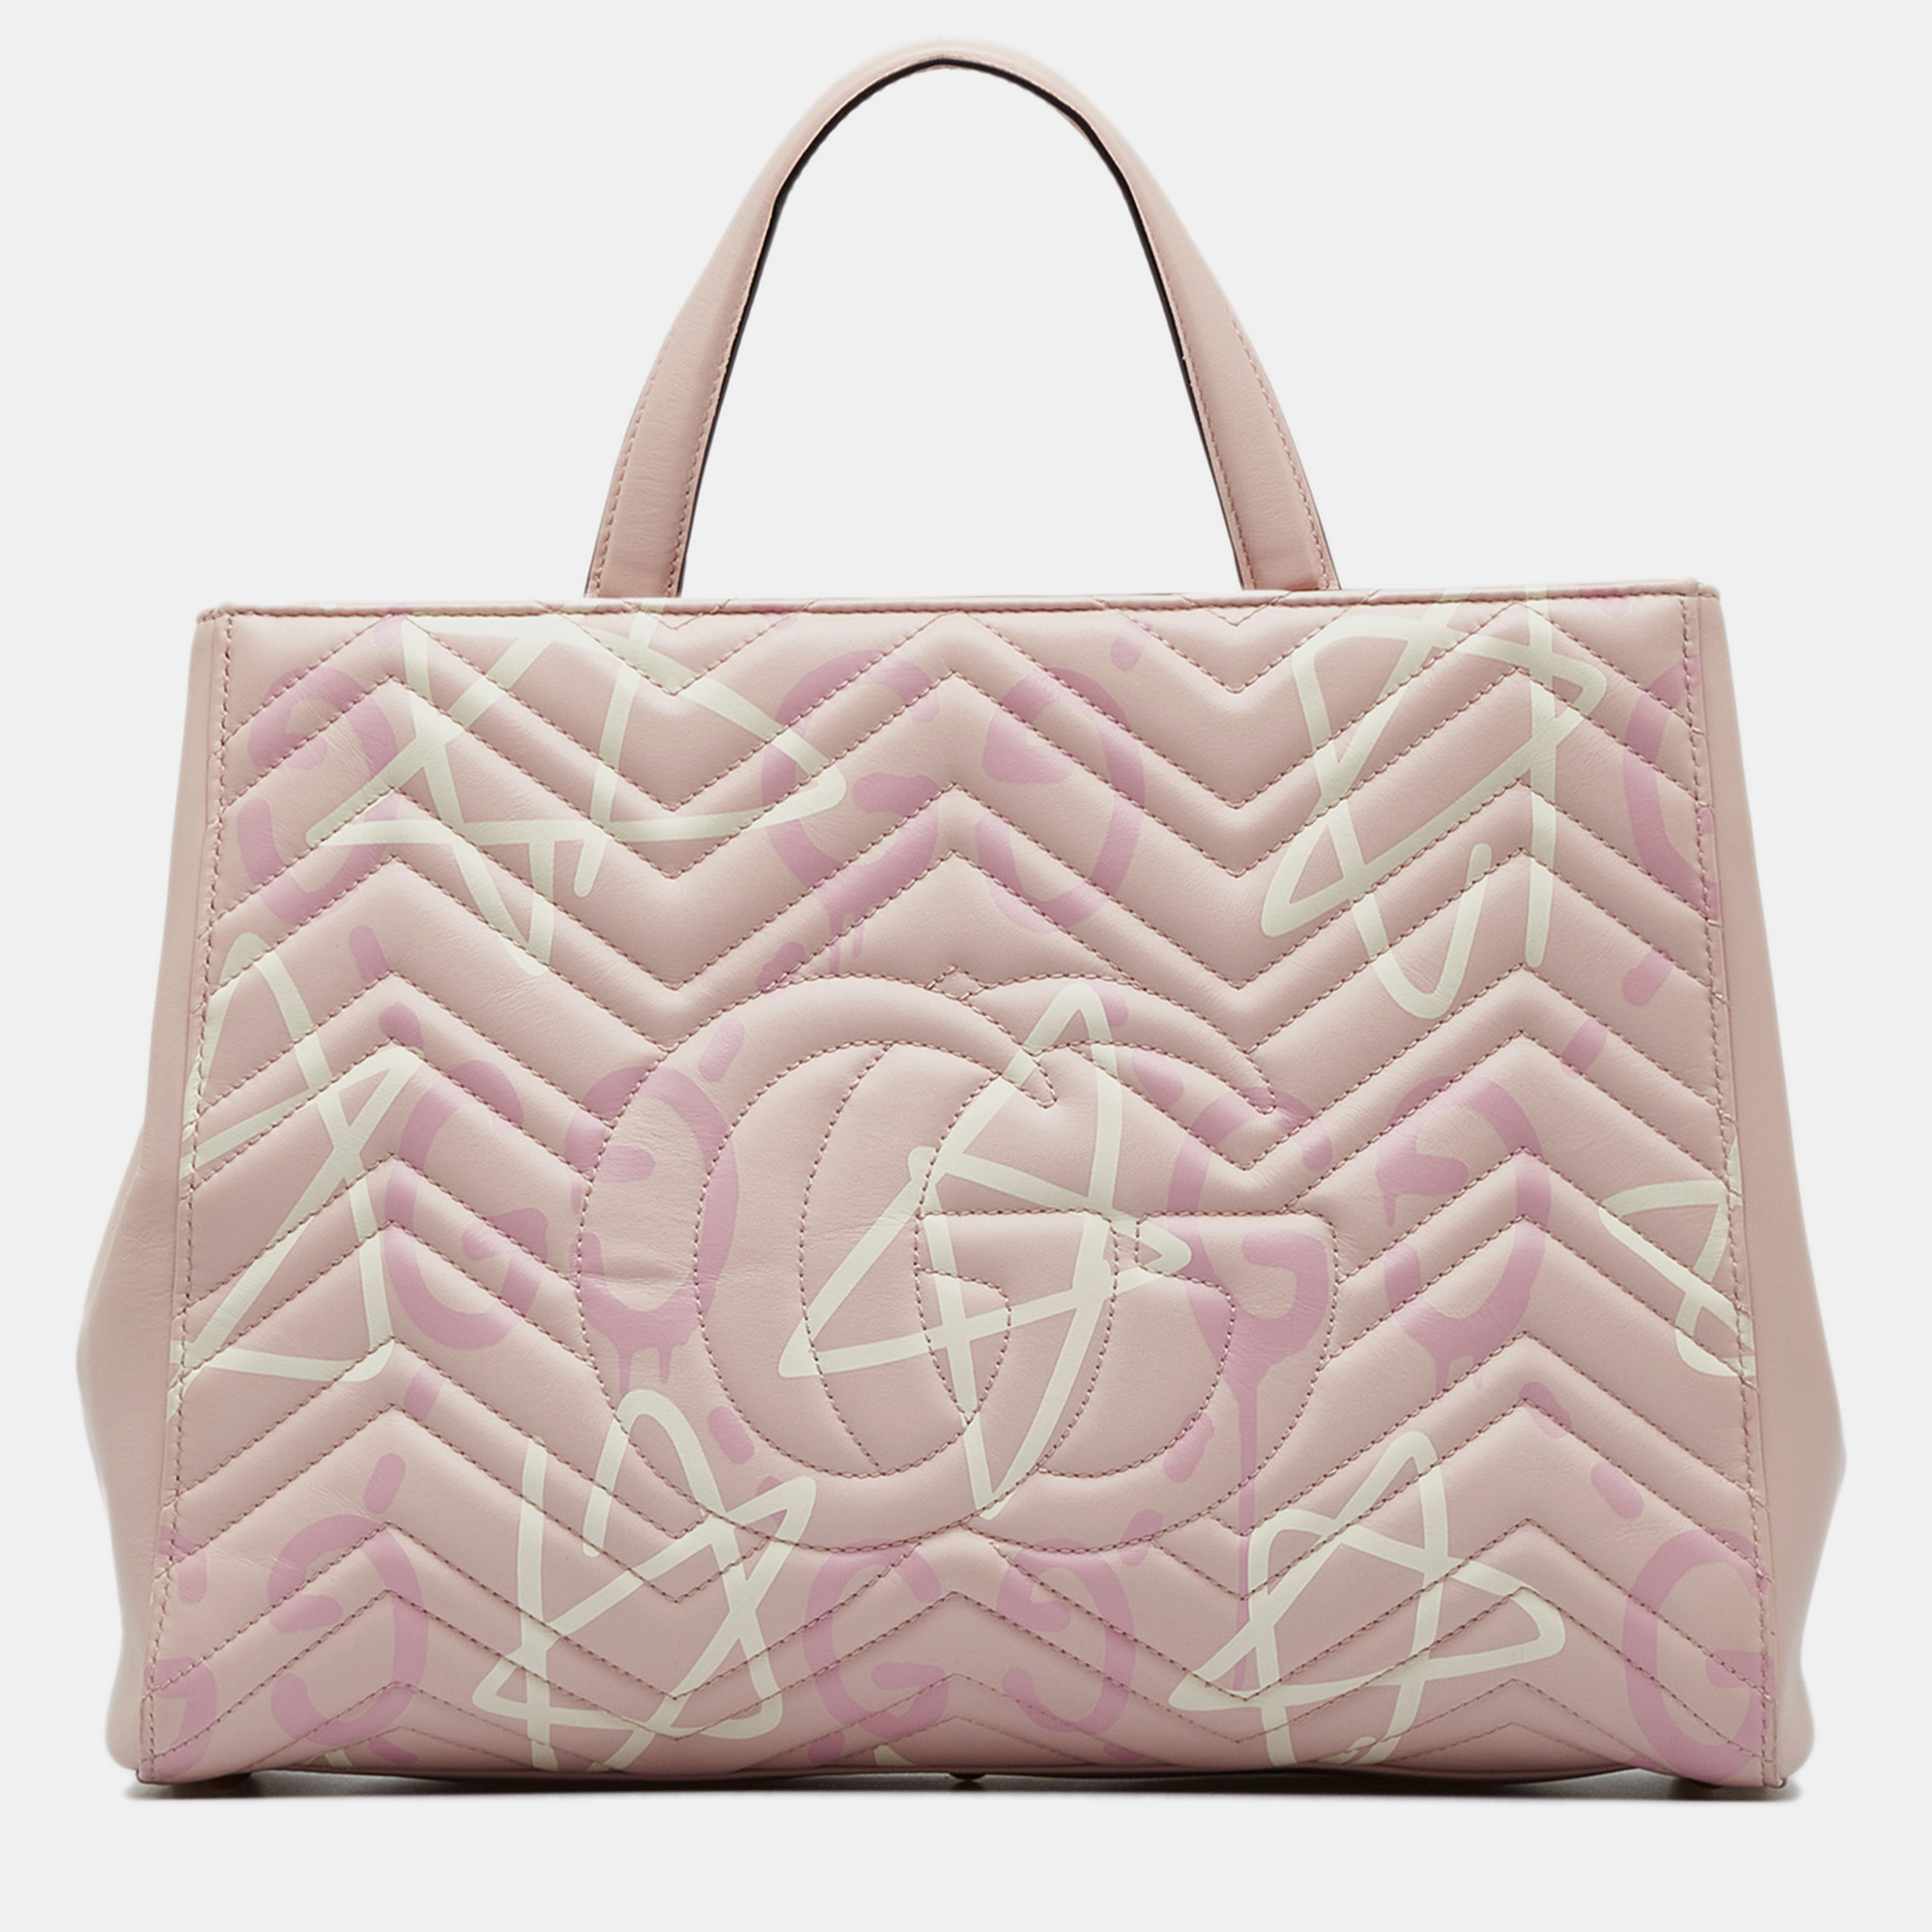 Gucci GG Marmont Ghost Satchel